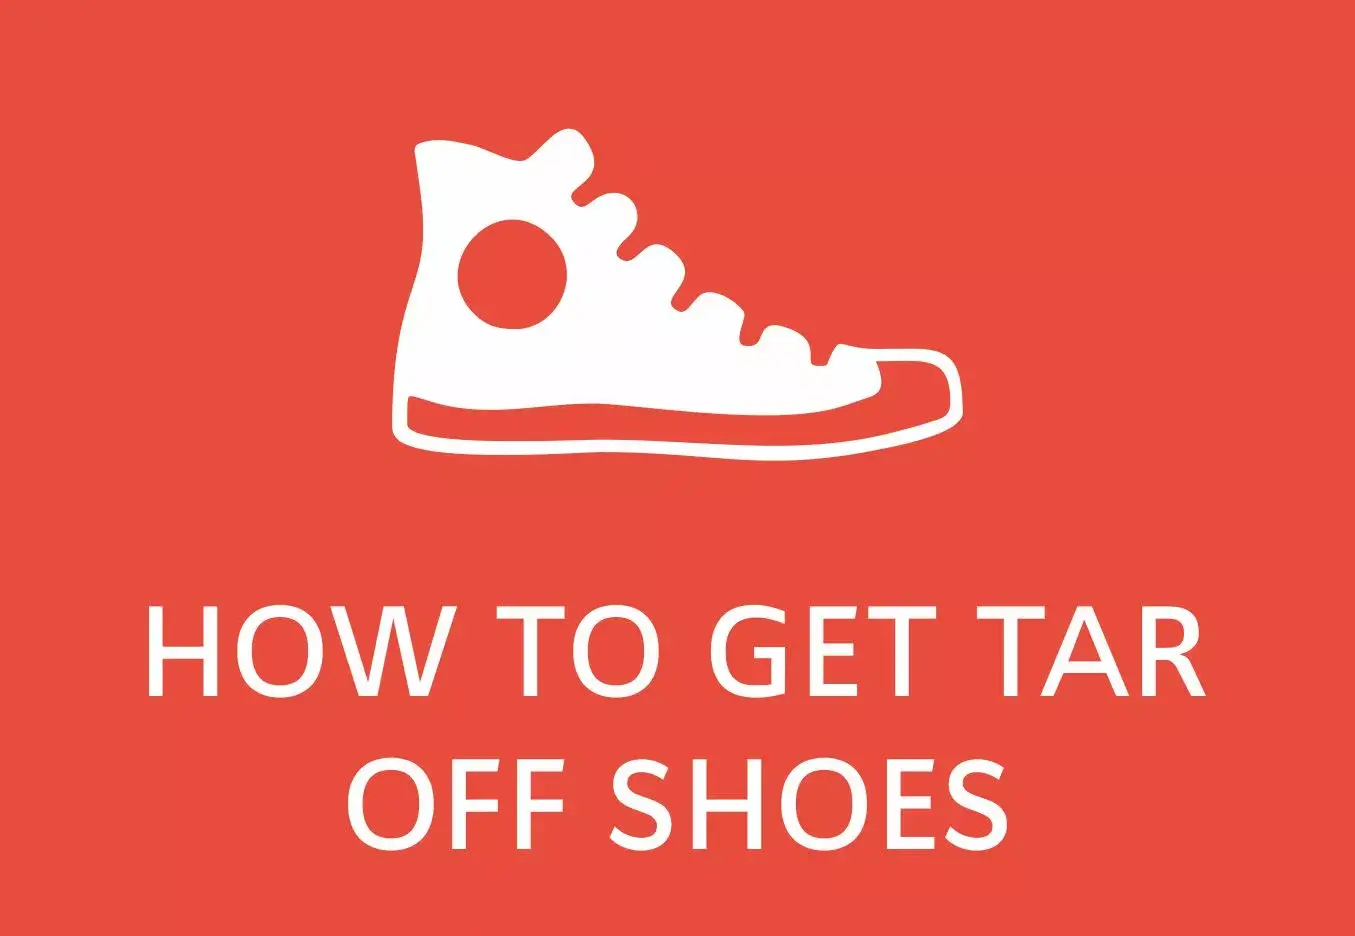 How to get tar off shoes